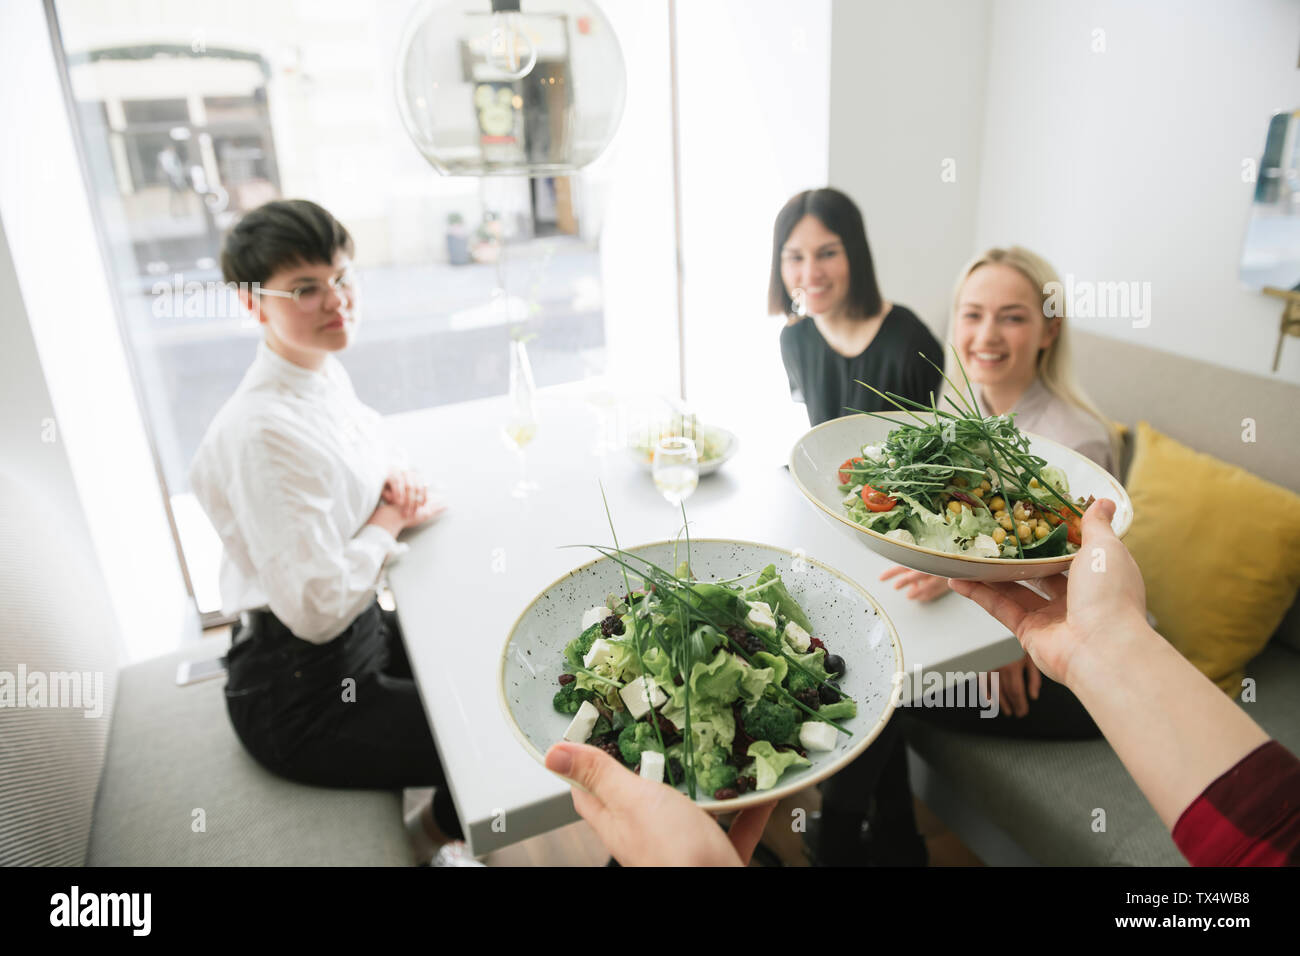 Waiter serving salad to friends in a restaurant Stock Photo